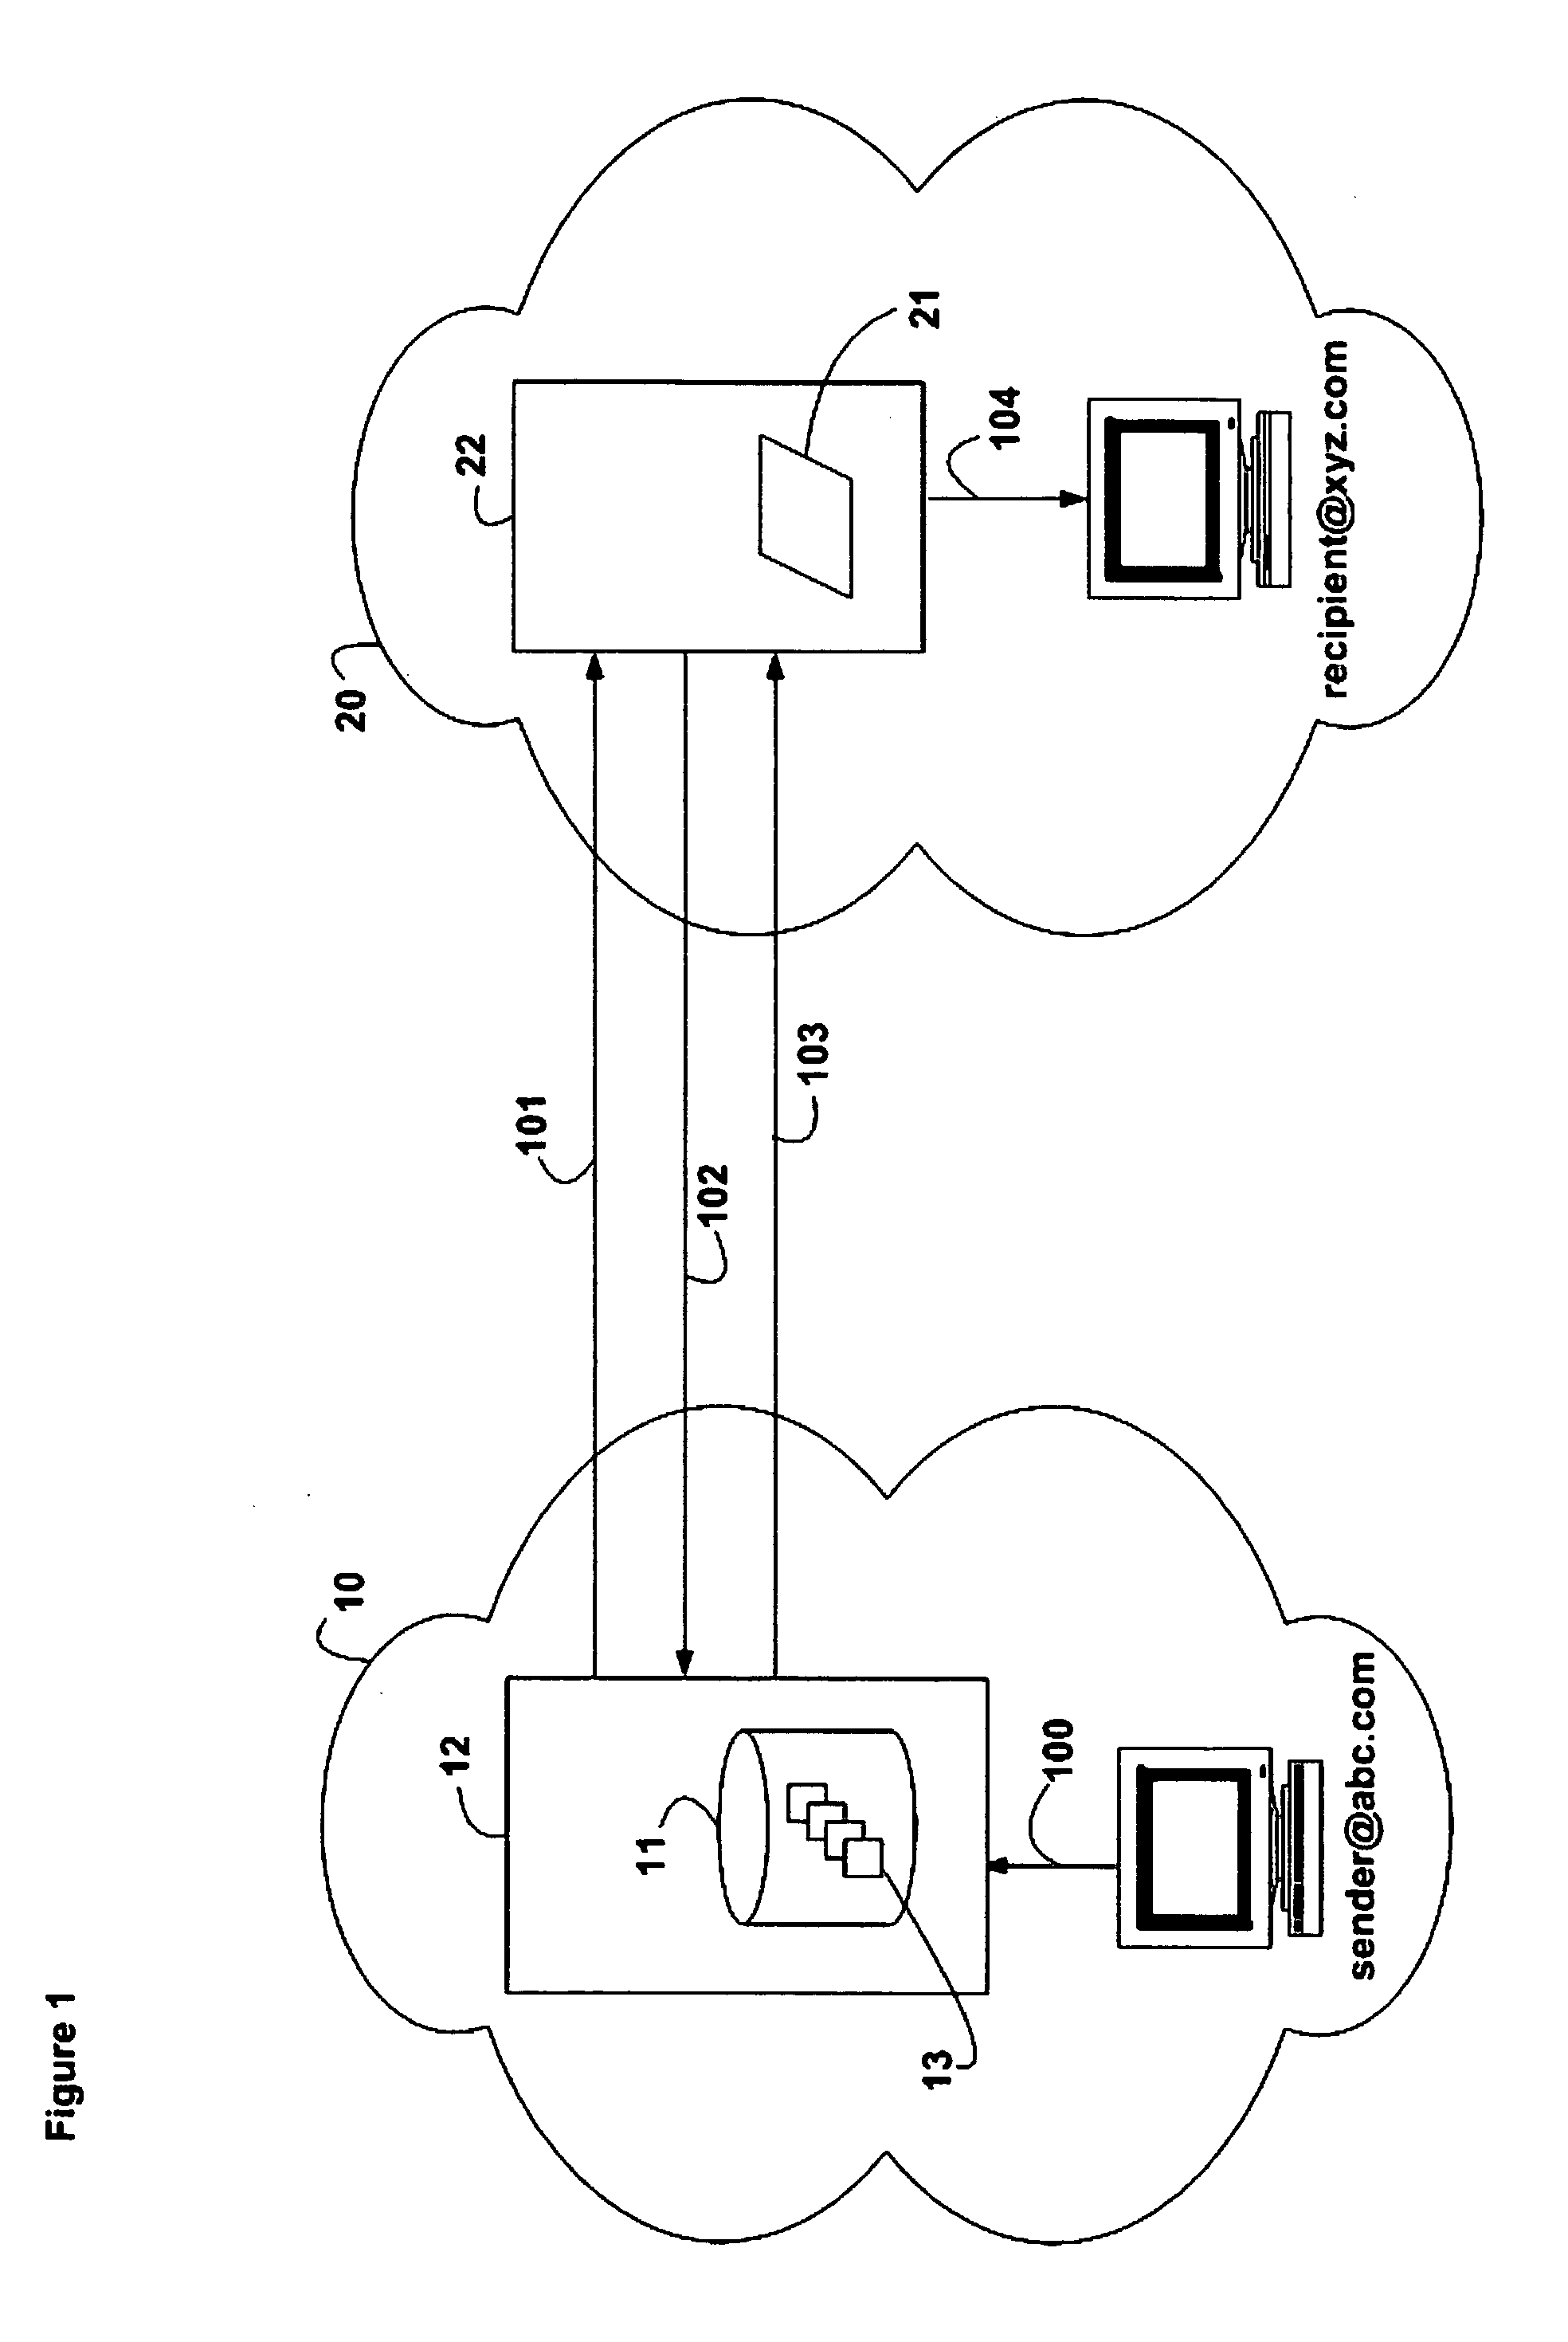 System and method for detecting and filtering unsolicited and undesired electronic messages